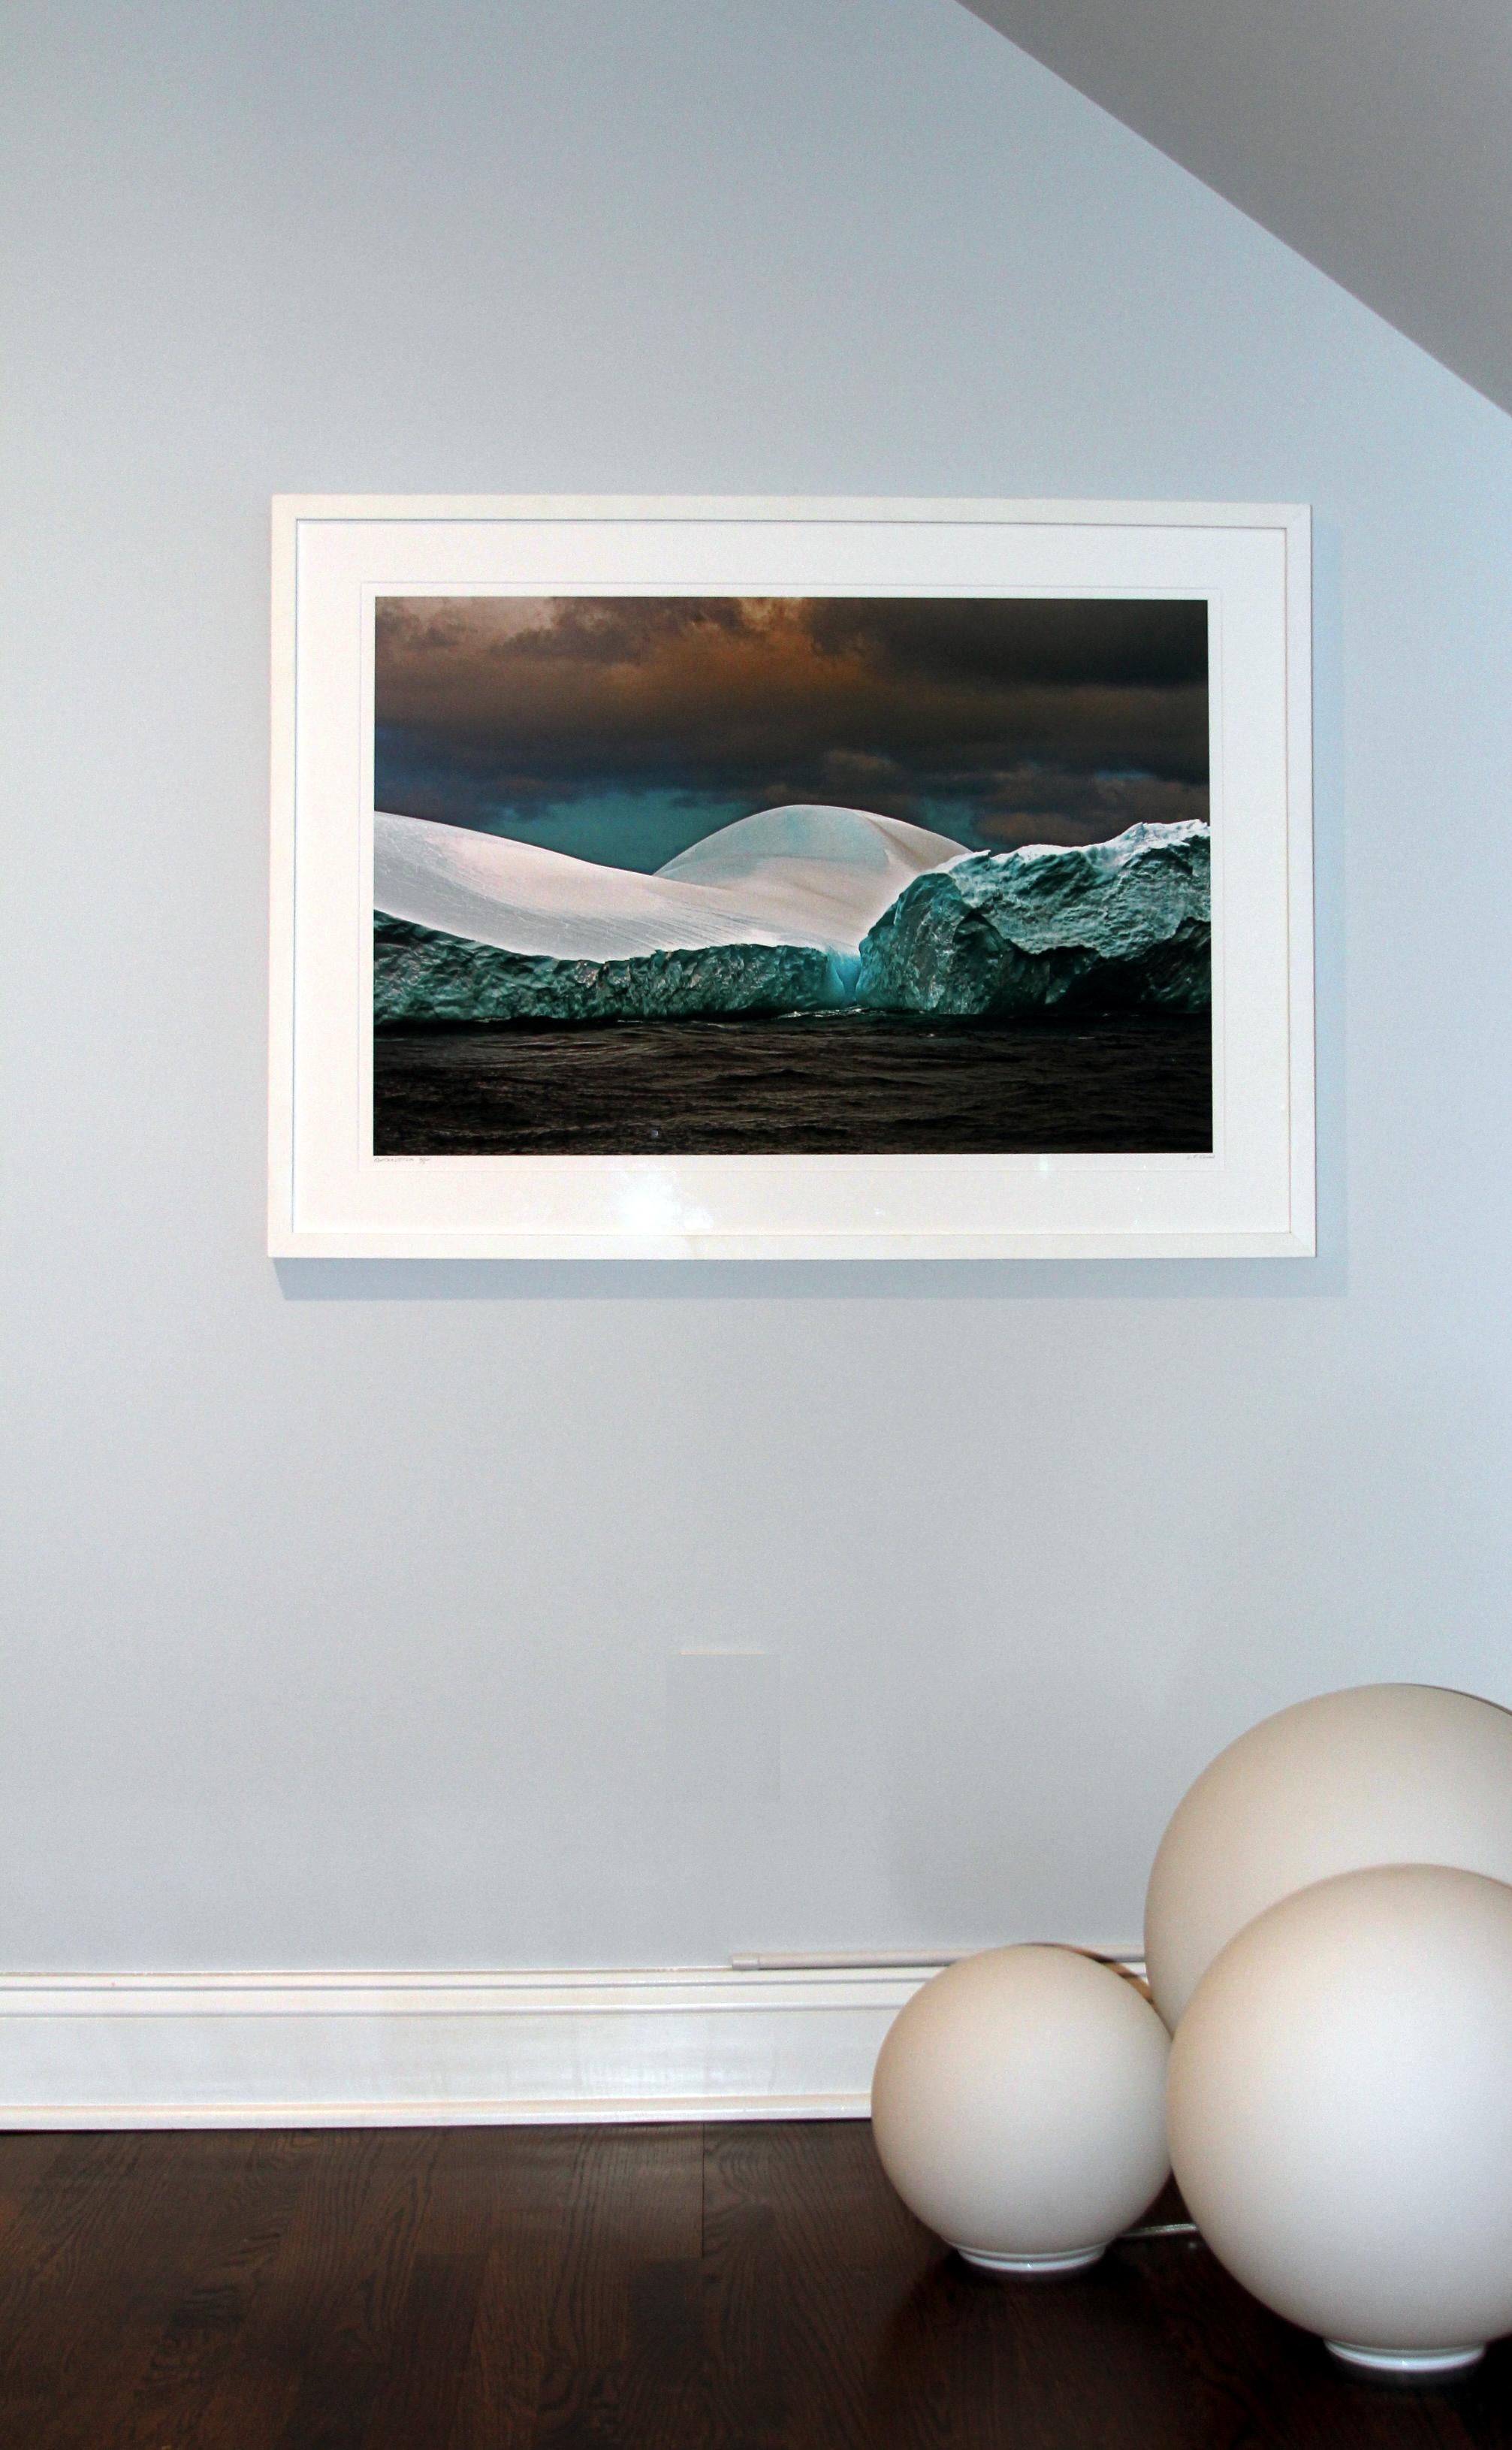 Antarctica #121 is a limited edition photograph which is part of the Antarctica/Patagonia Series by John Conn taken in 2010.  The image is 20x30 printed on 24x36 archival paper.  It is currently framed in a white frame.  It is an edition of 5. The